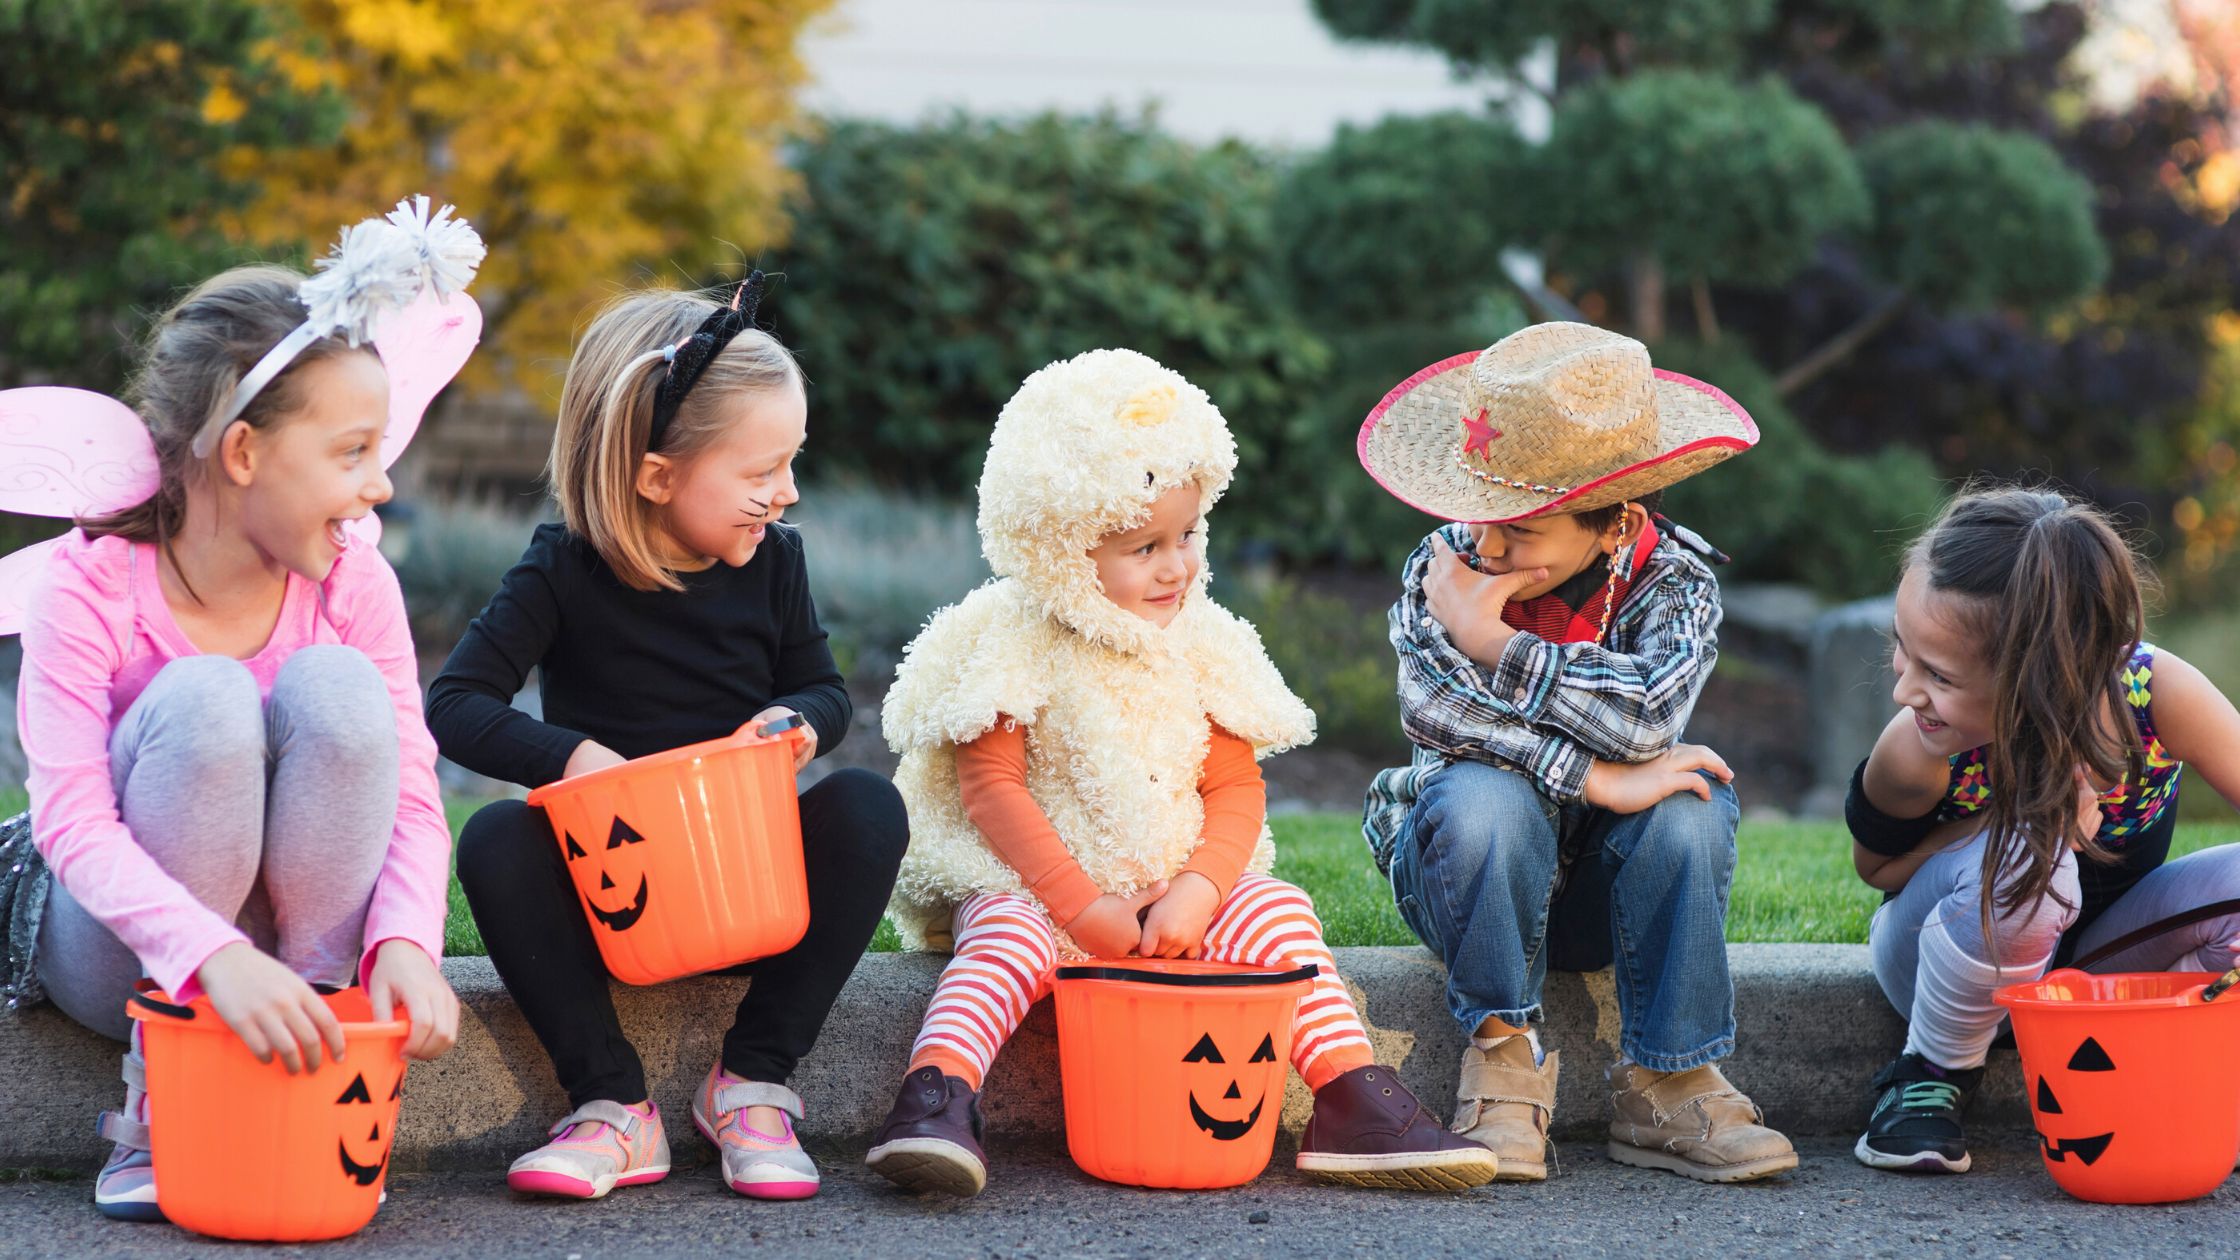 5 children sitting on the curb in their Halloween costumes after trick or treating.